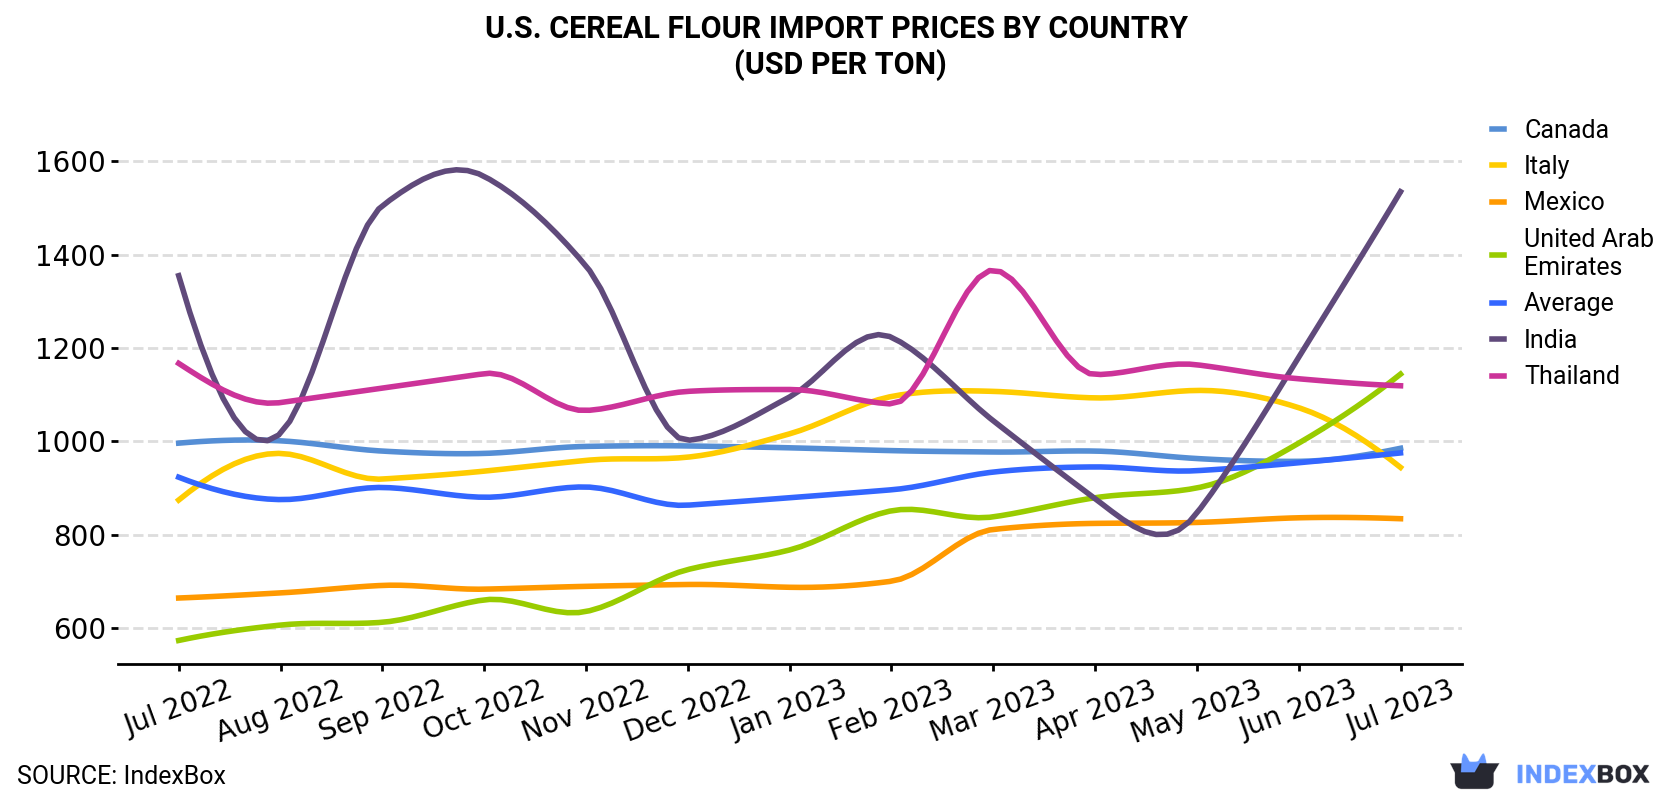 U.S. Cereal Flour Import Prices By Country (USD Per Ton)